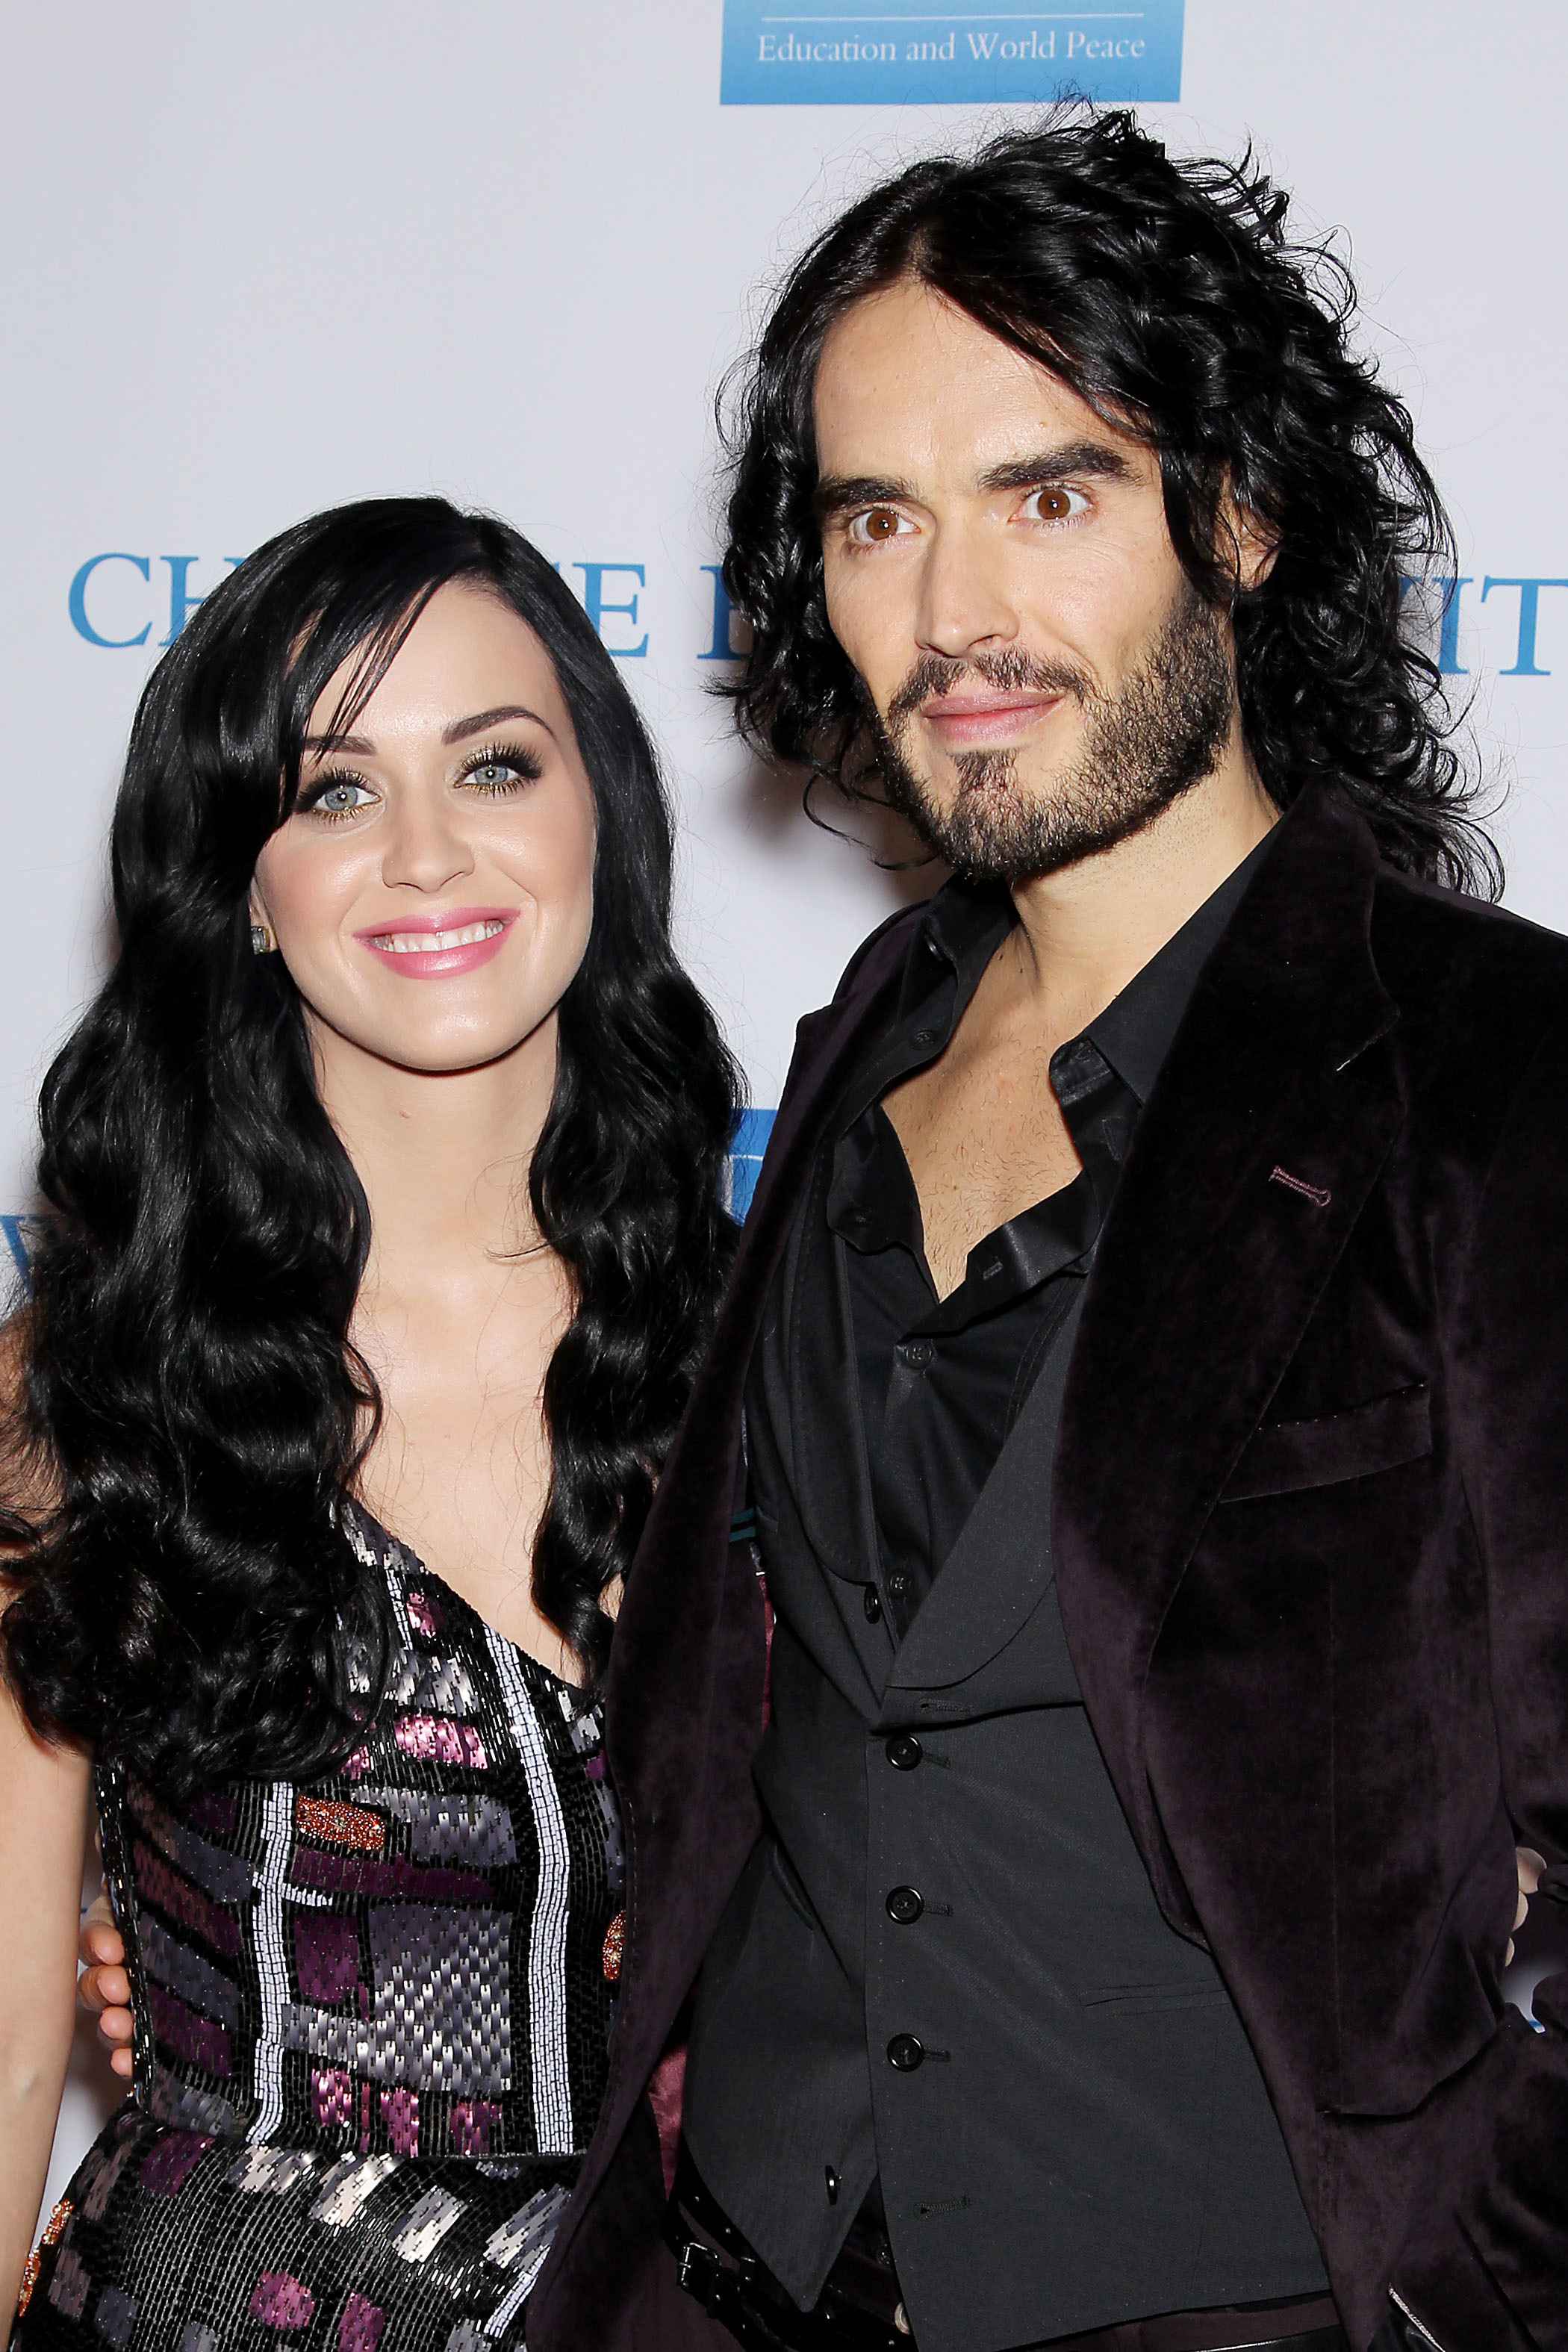 <p>Katy Perry met former husband Russell Brand in 2009 on a movie set. "When he was filming 'Get Him to the Greek,' I did a cameo with him," she told Glamour in 2010. "My scene [which later got cut] called for me to make out with him. And on the way down the stairs after the scene, I was hopping like a bunny. I hop like a bunny when I'm happy -- I get a bit childlike." They saw each other again at the 2009 MTV Video Music Awards later that summer and were soon inseparable. Russell proposed during a New Year's trip to India just a few months later. They married 10 months after that, but just 14 months in, Russell told Katy he wanted a divorce -- giving her the message via text, she told Vogue.</p>